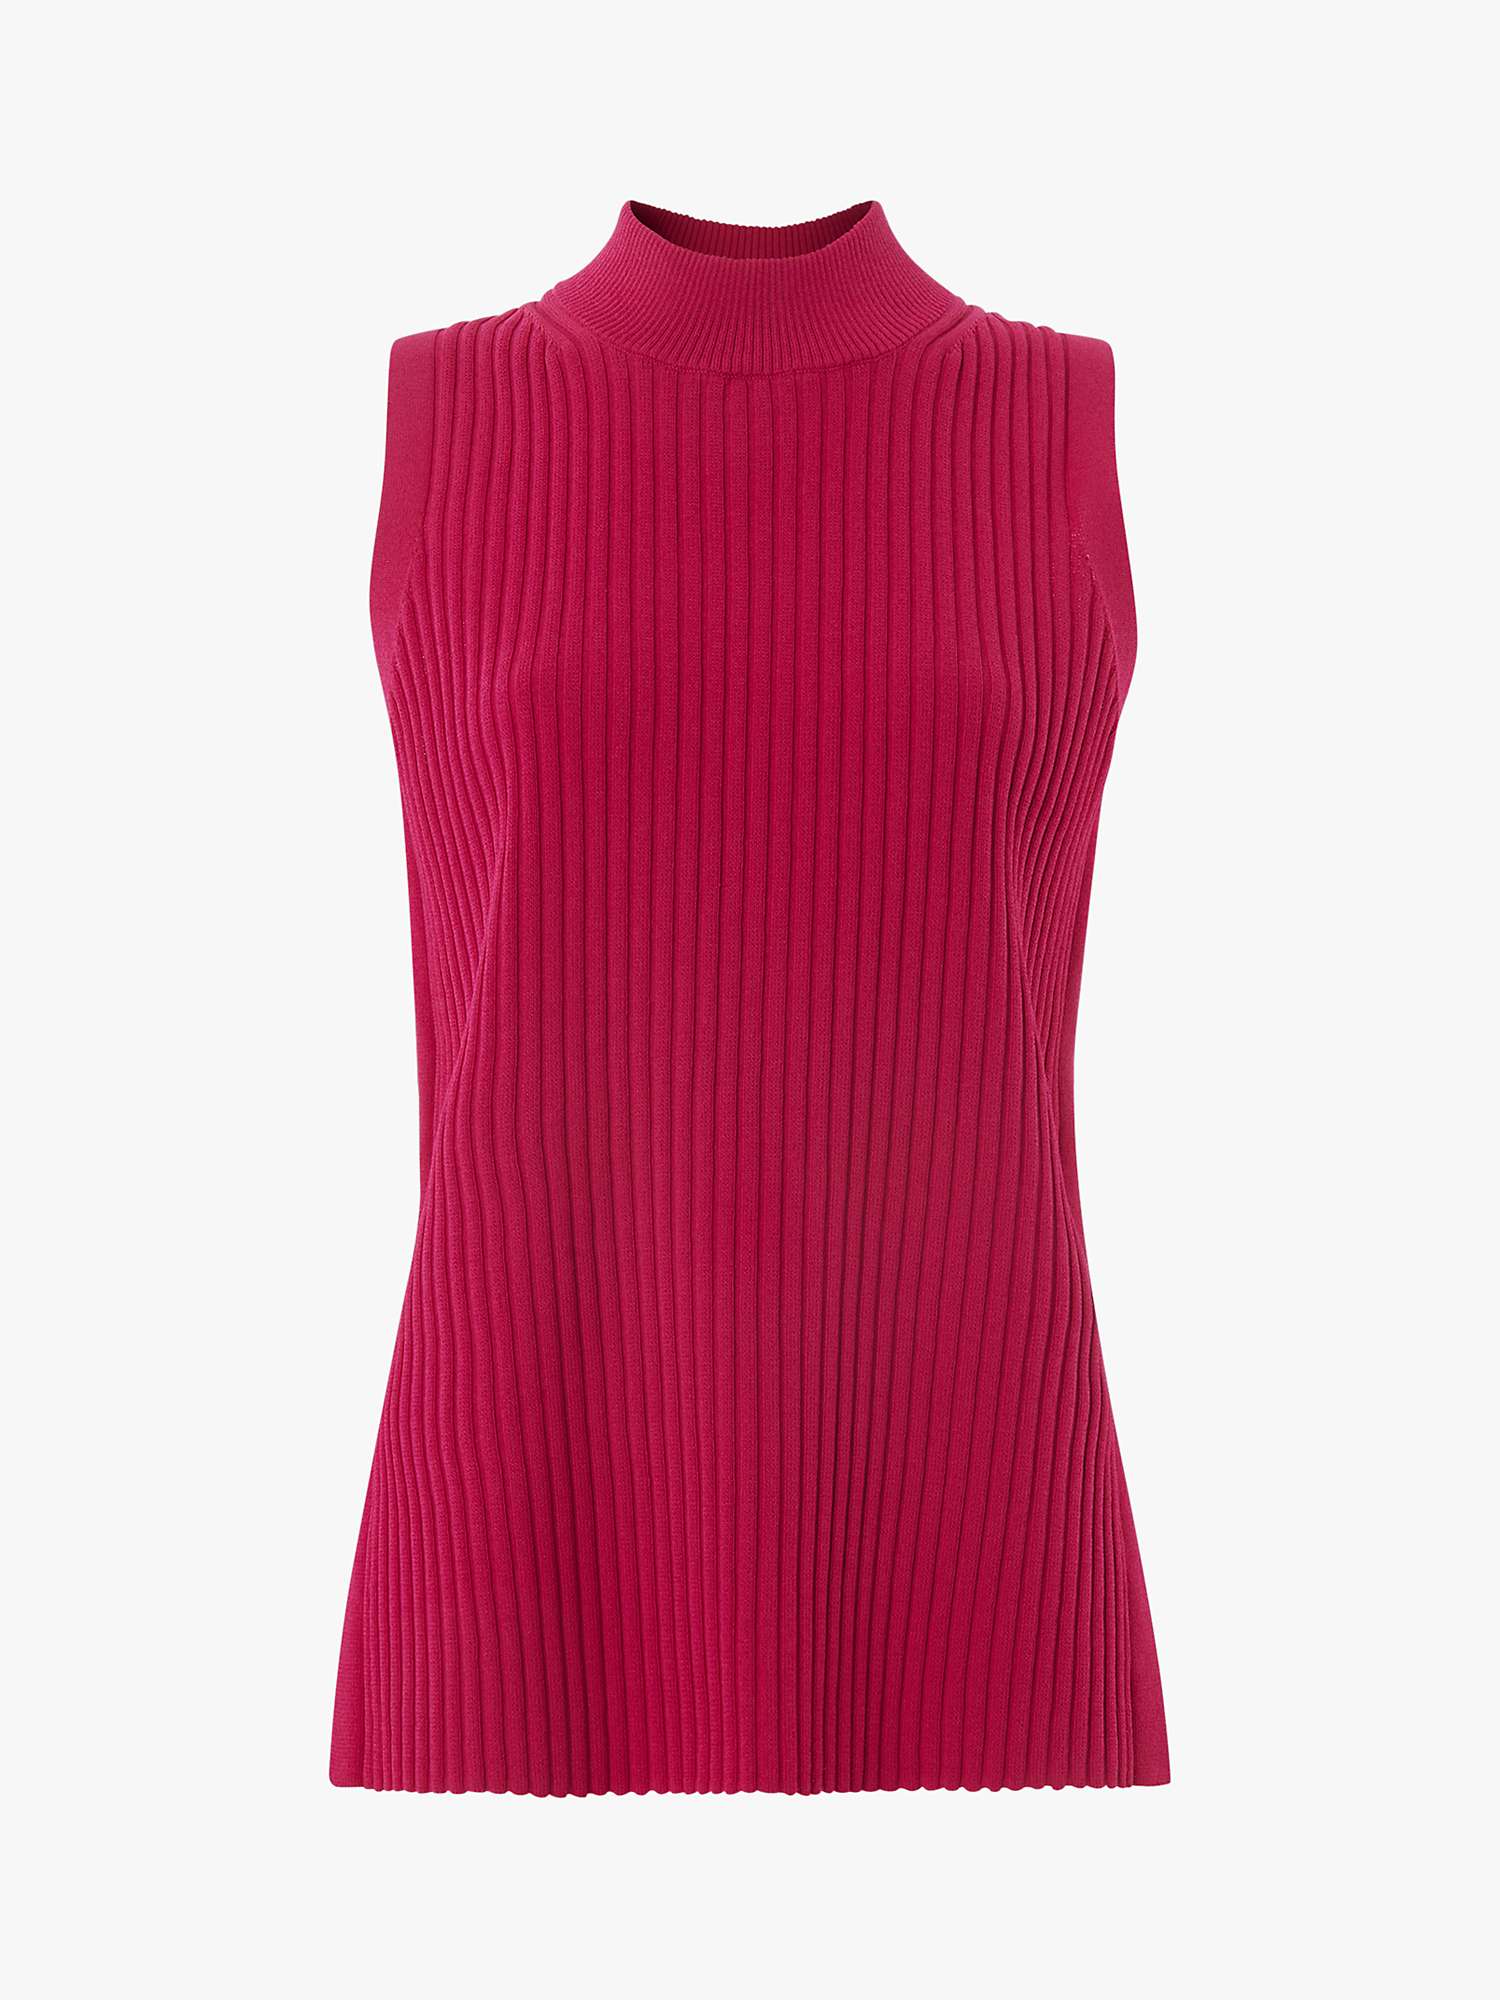 Buy Whistles High Neck Ribbed Knit Tunic Top, Pink Online at johnlewis.com